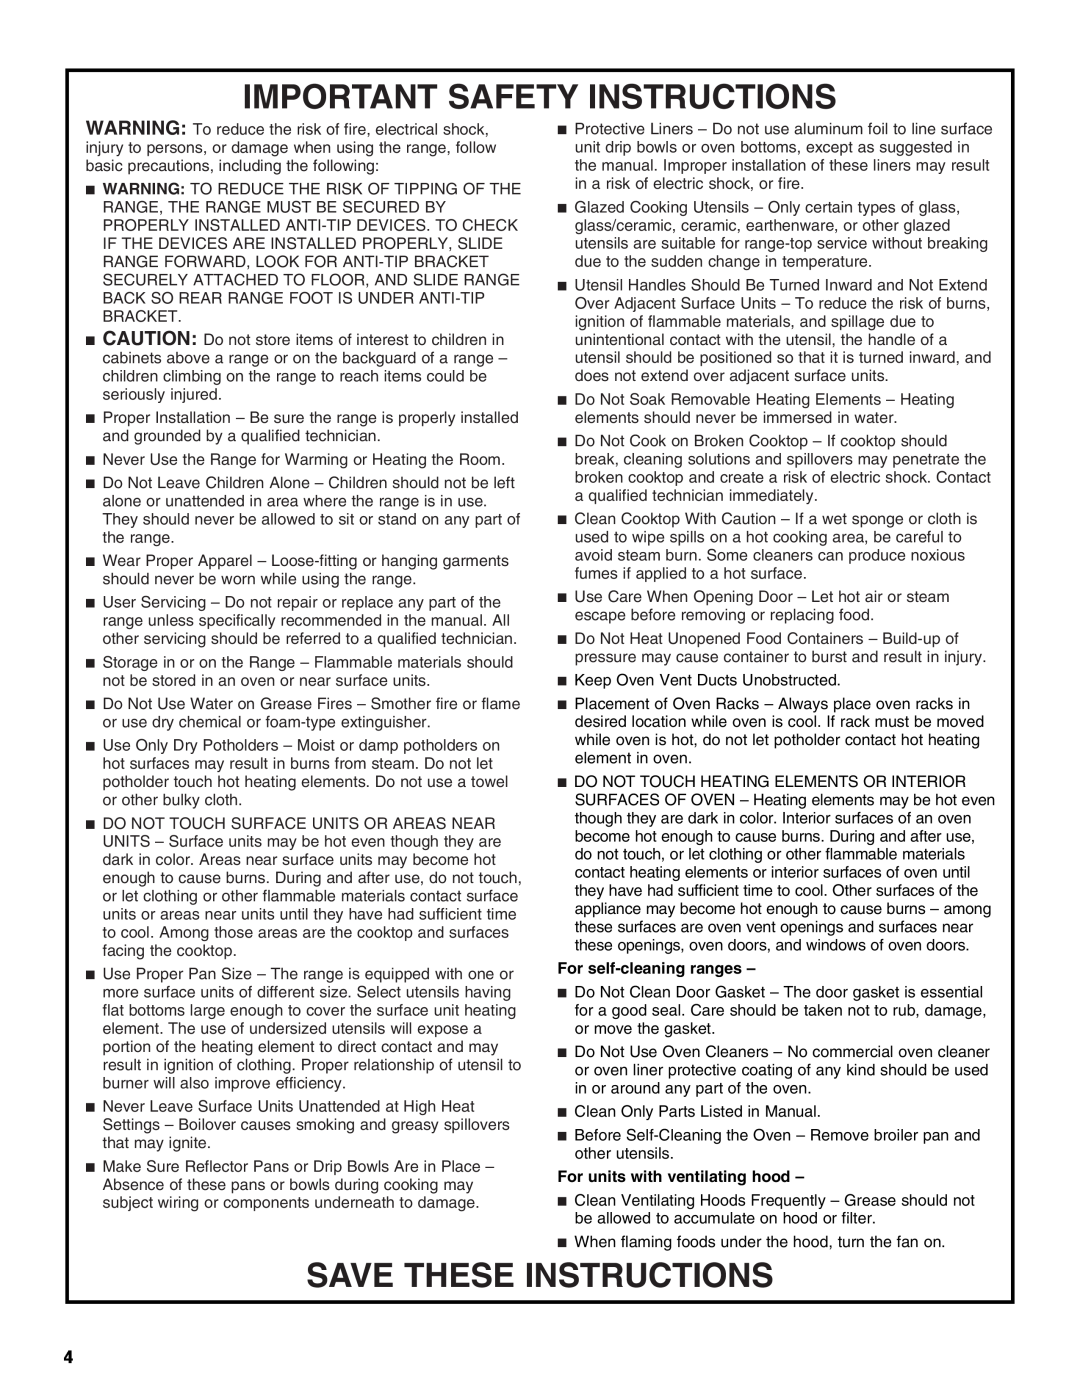 Whirlpool 9762257 manual Important Safety Instructions, Save These Instructions, For self-cleaning ranges 